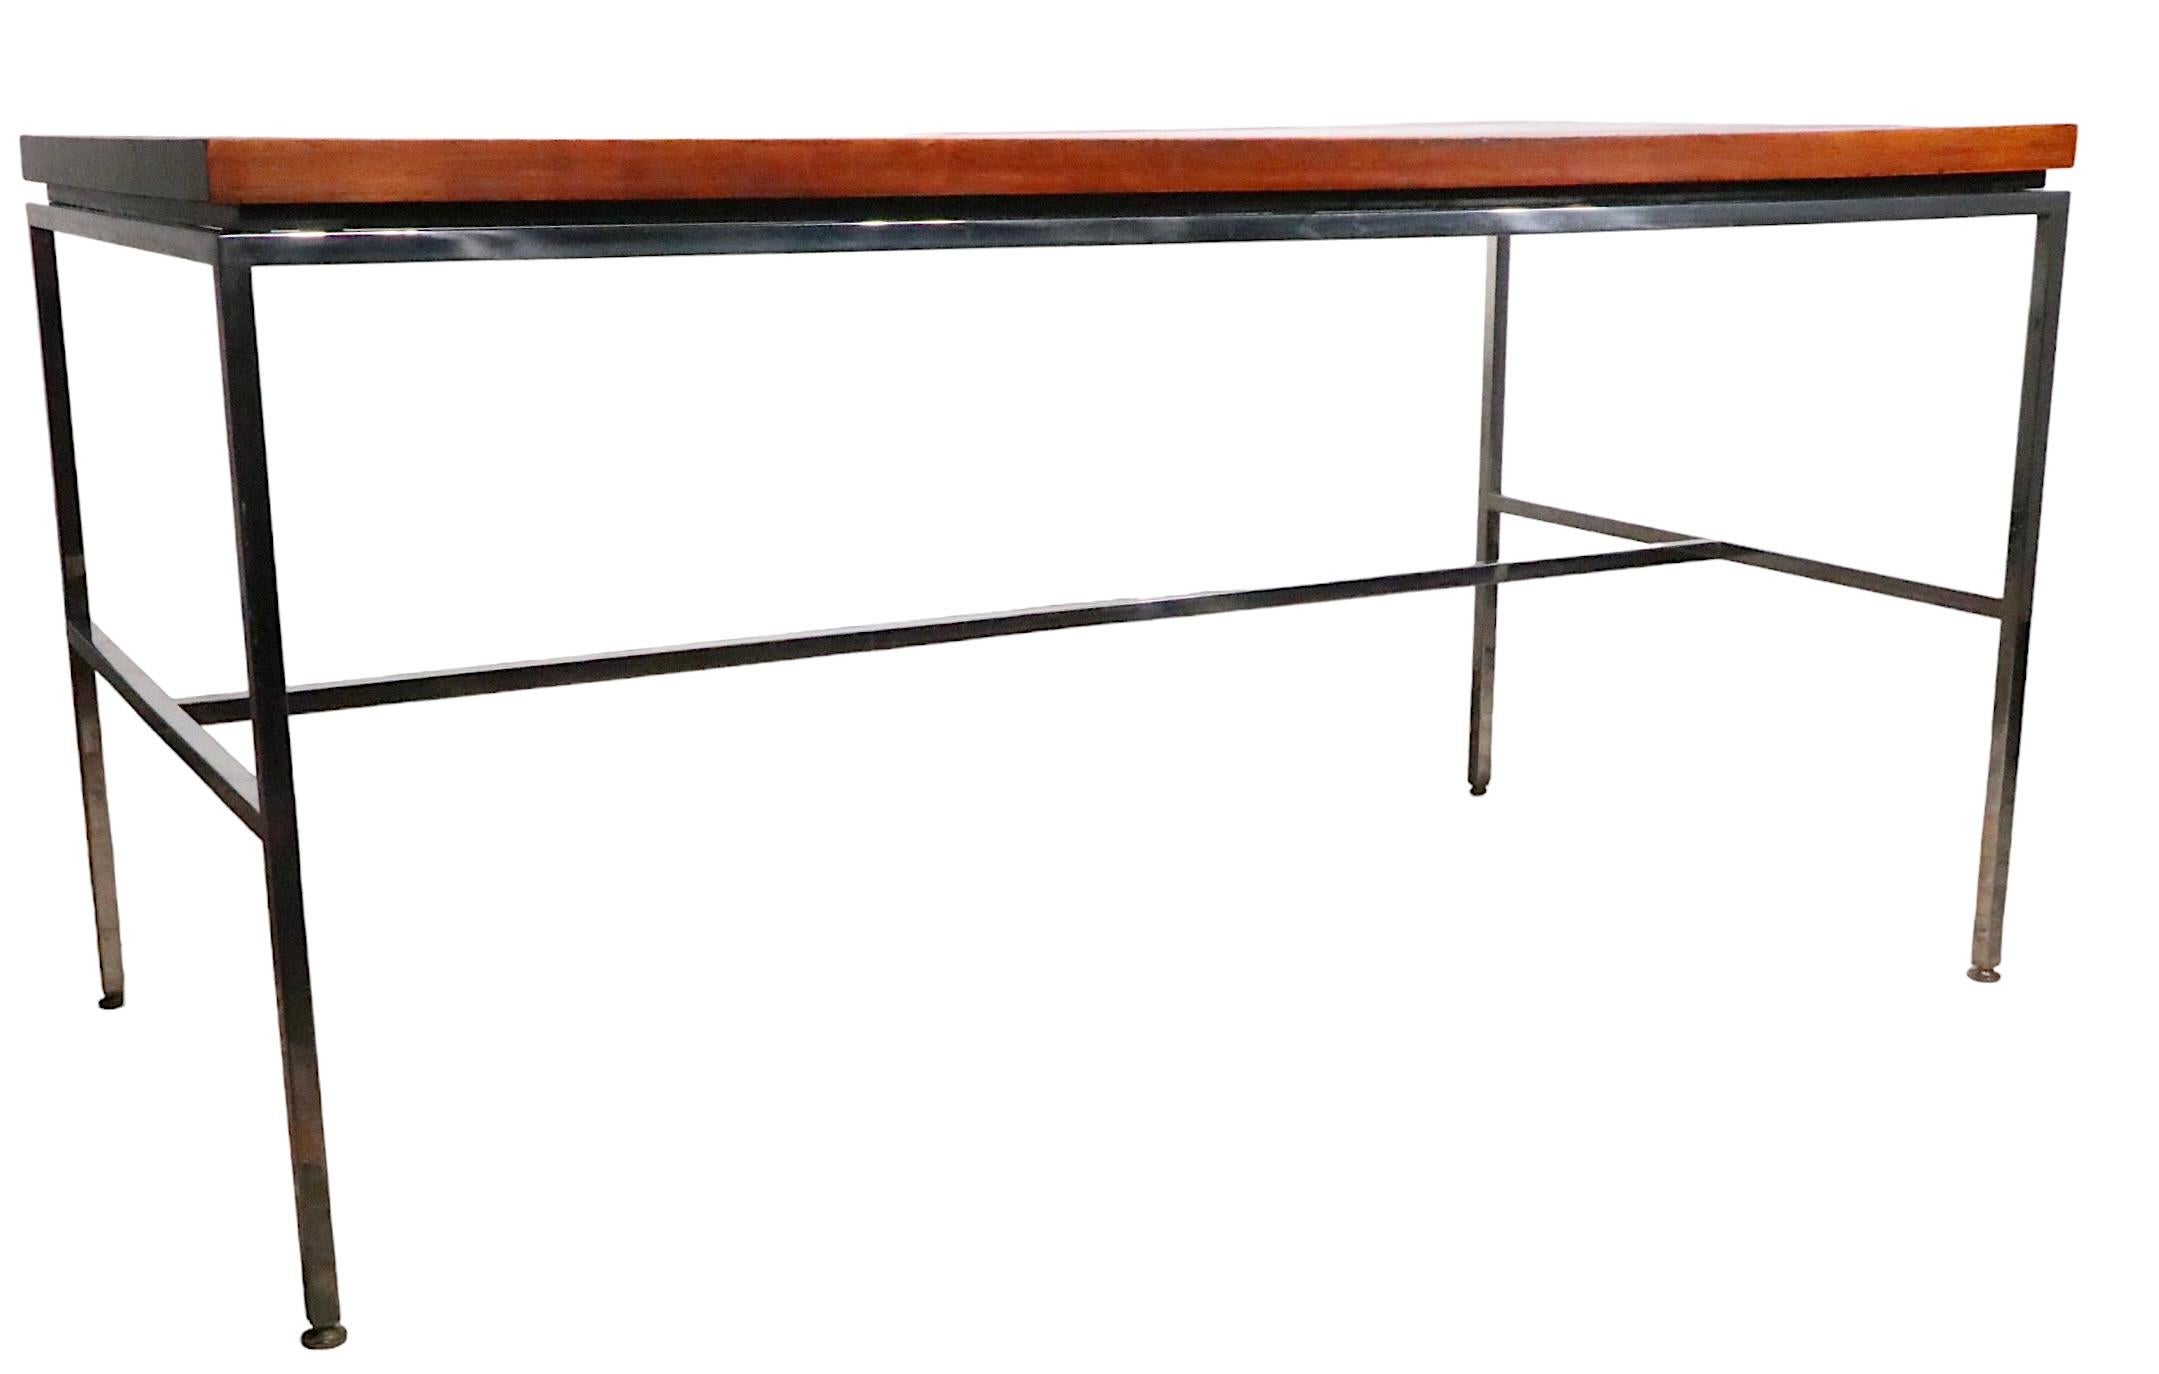 Rosewood and Chrome Drexel Index Writing Desk Library Table, circa 1970s For Sale 4